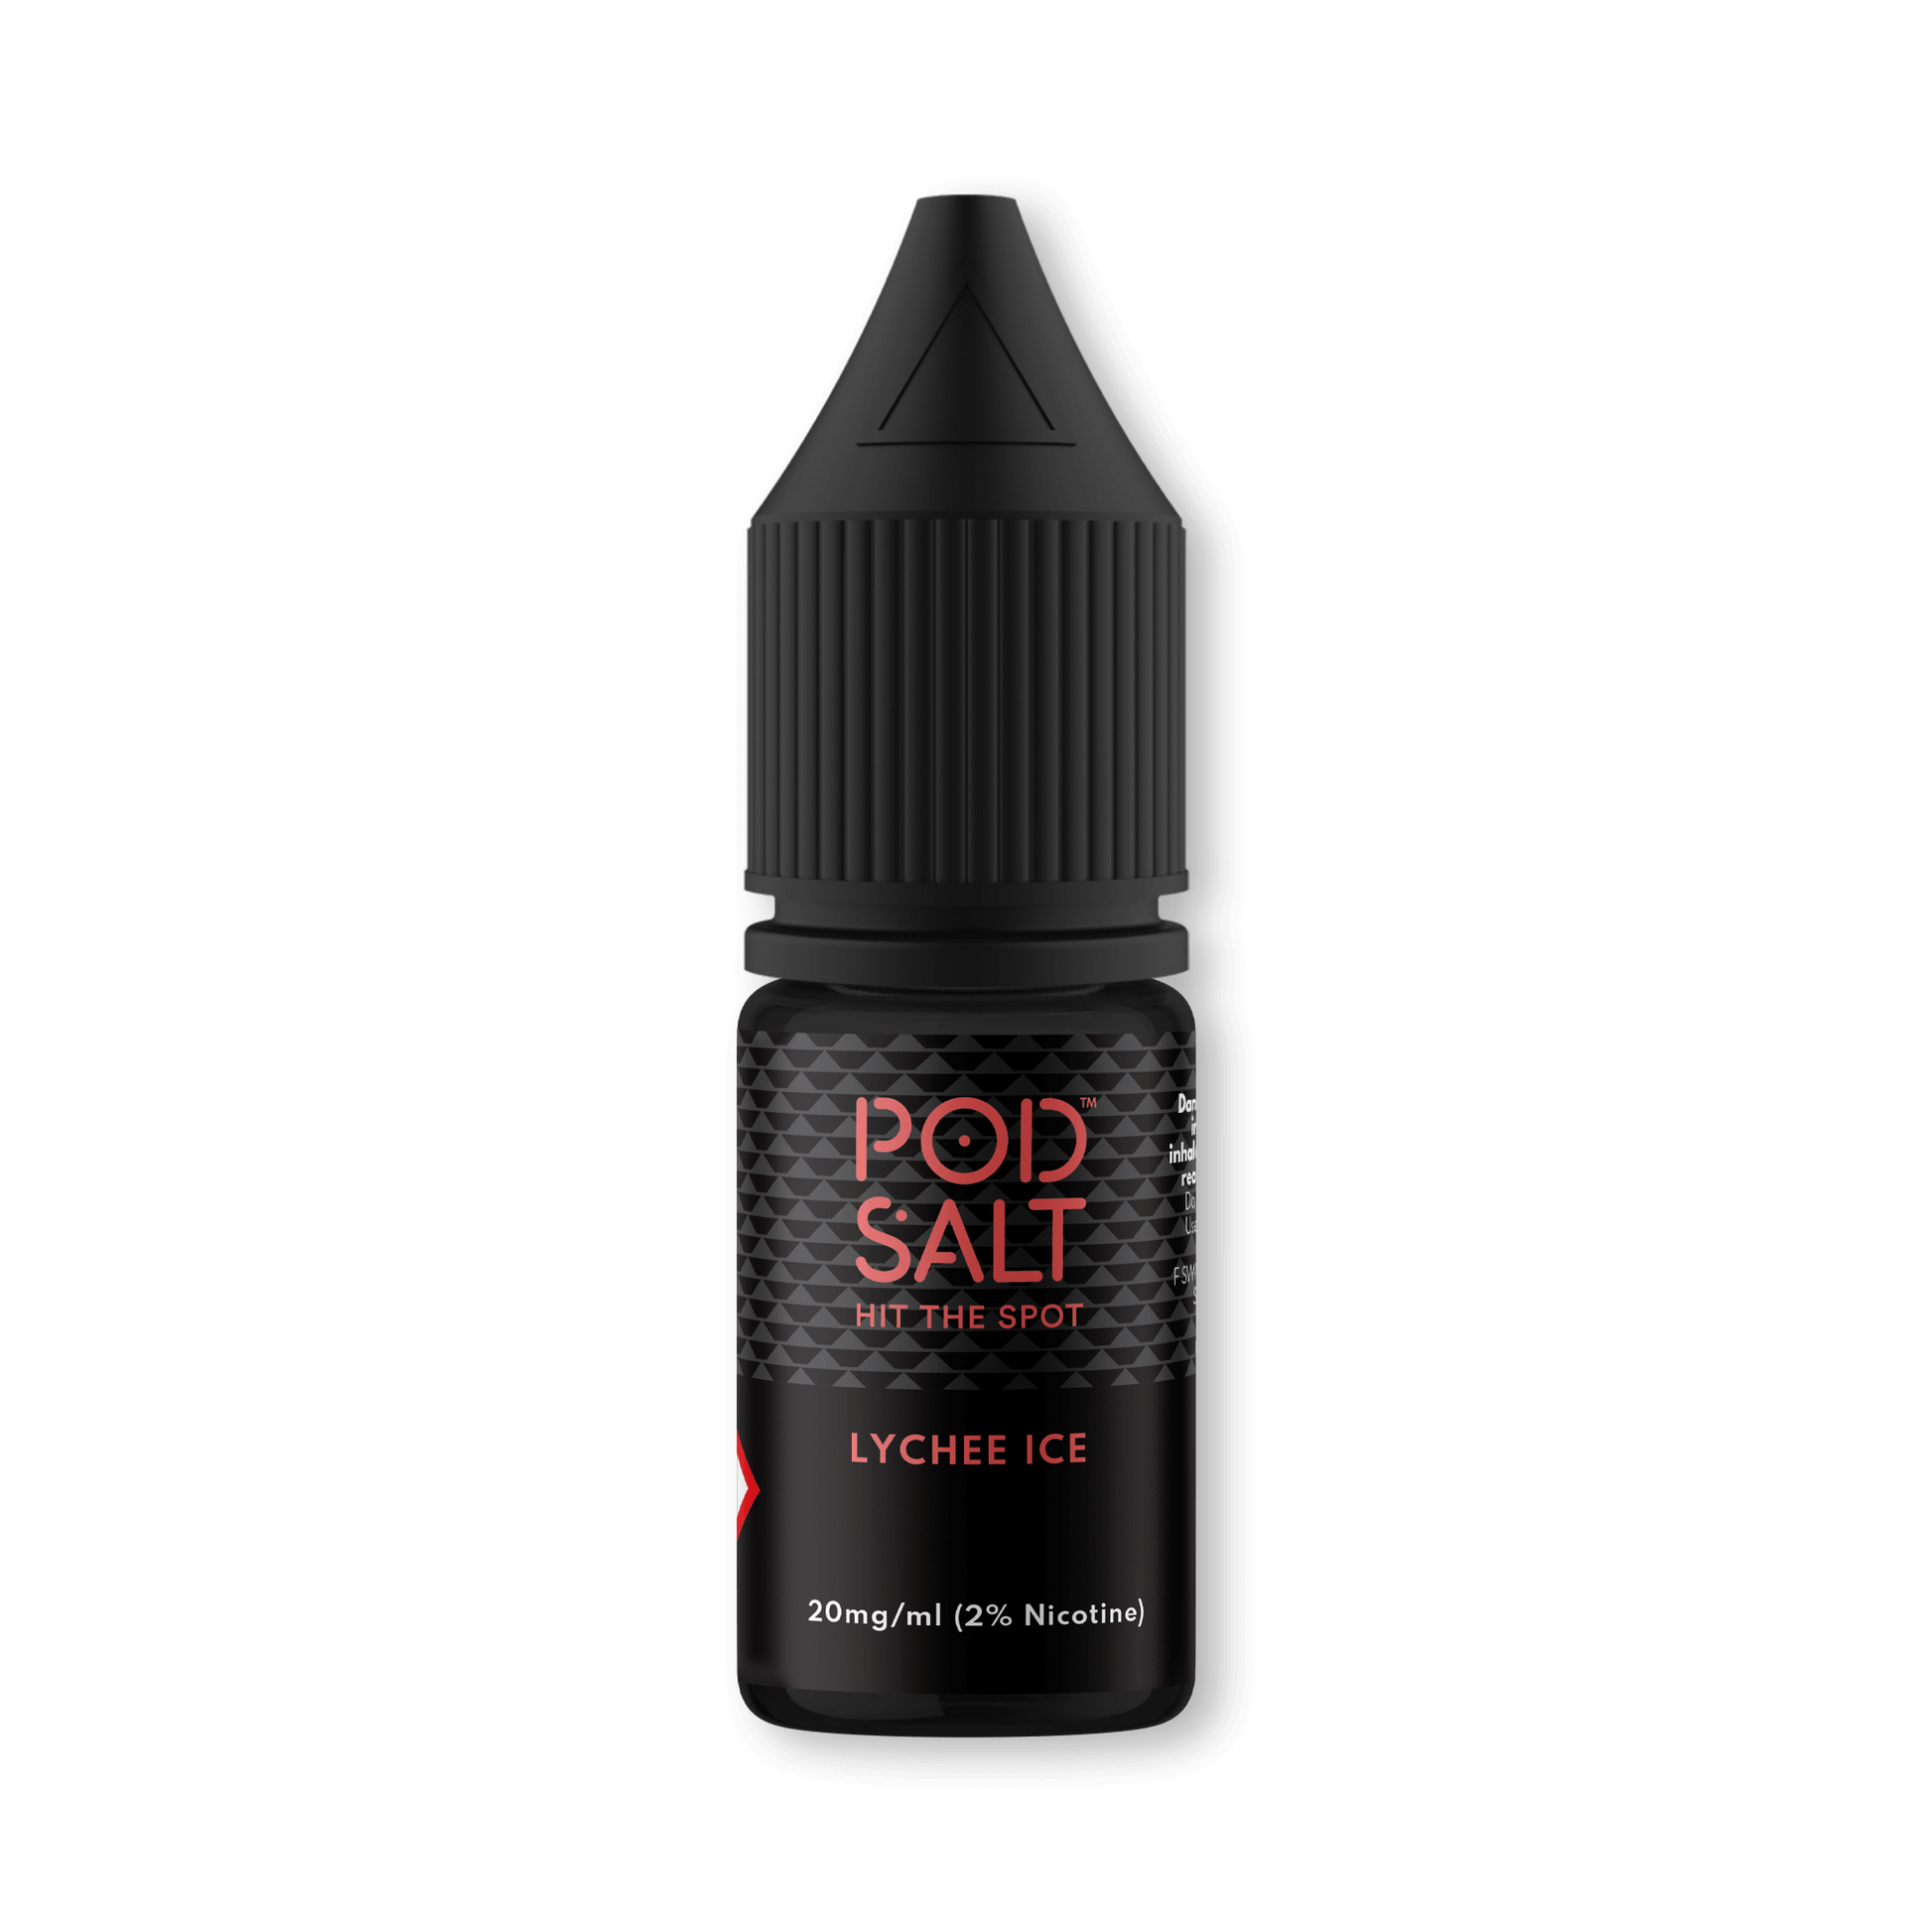 invigorating lychee fruit icy twist tropical Southeast Asia delicately fragrant lychee blend light and sweet refreshing ice finish acclaimed Nicotine Salts formula award-winning touch Flavour profile: Lychee, Ice 30ml bottle size 50VG/50PG ratio Made in the UK TPD Compliant